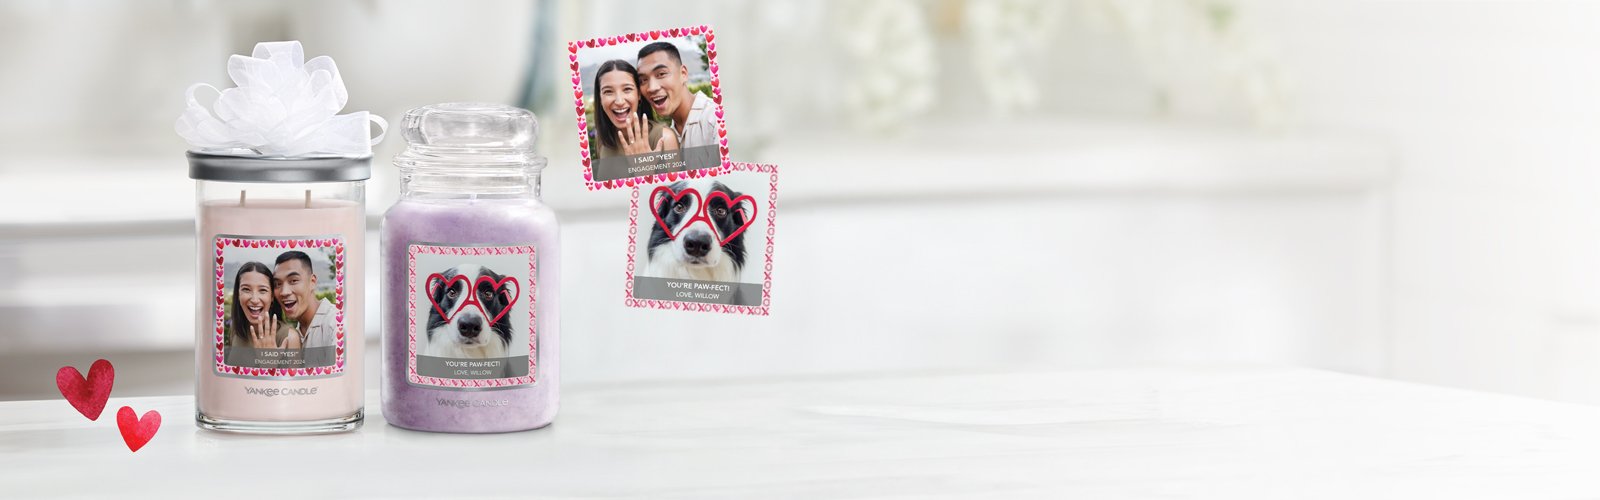 a signature large tumbler candle and an original large jar candle with personalized photo labels on a table